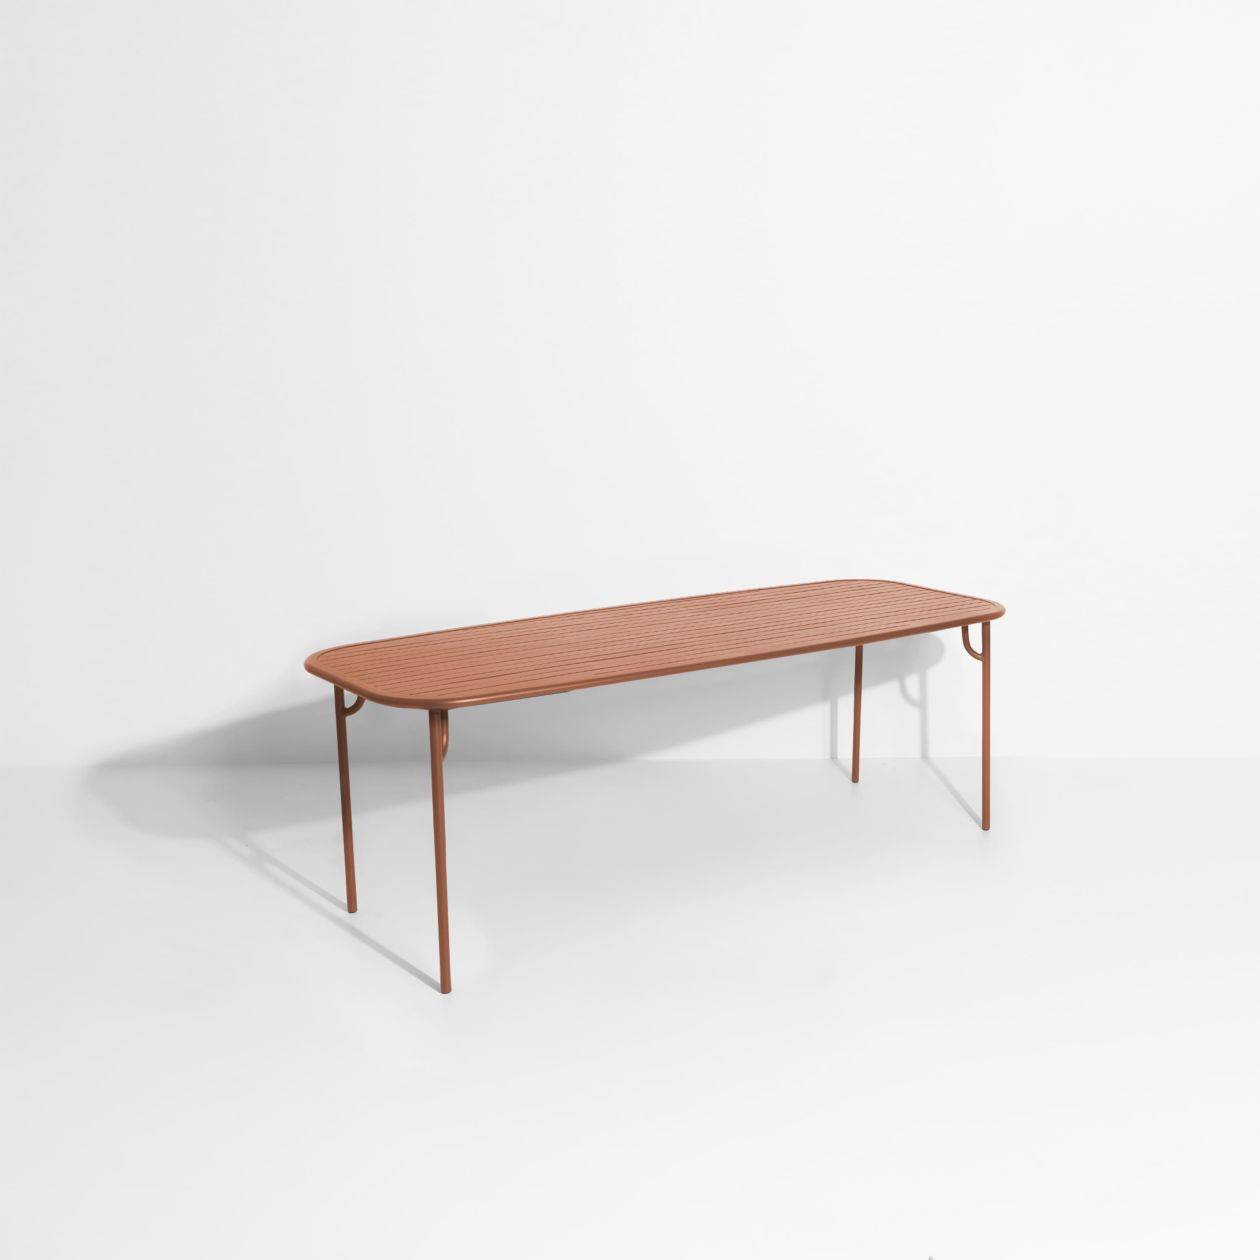 Week-End Large Rectangular Dining Table with slats - Terracotta